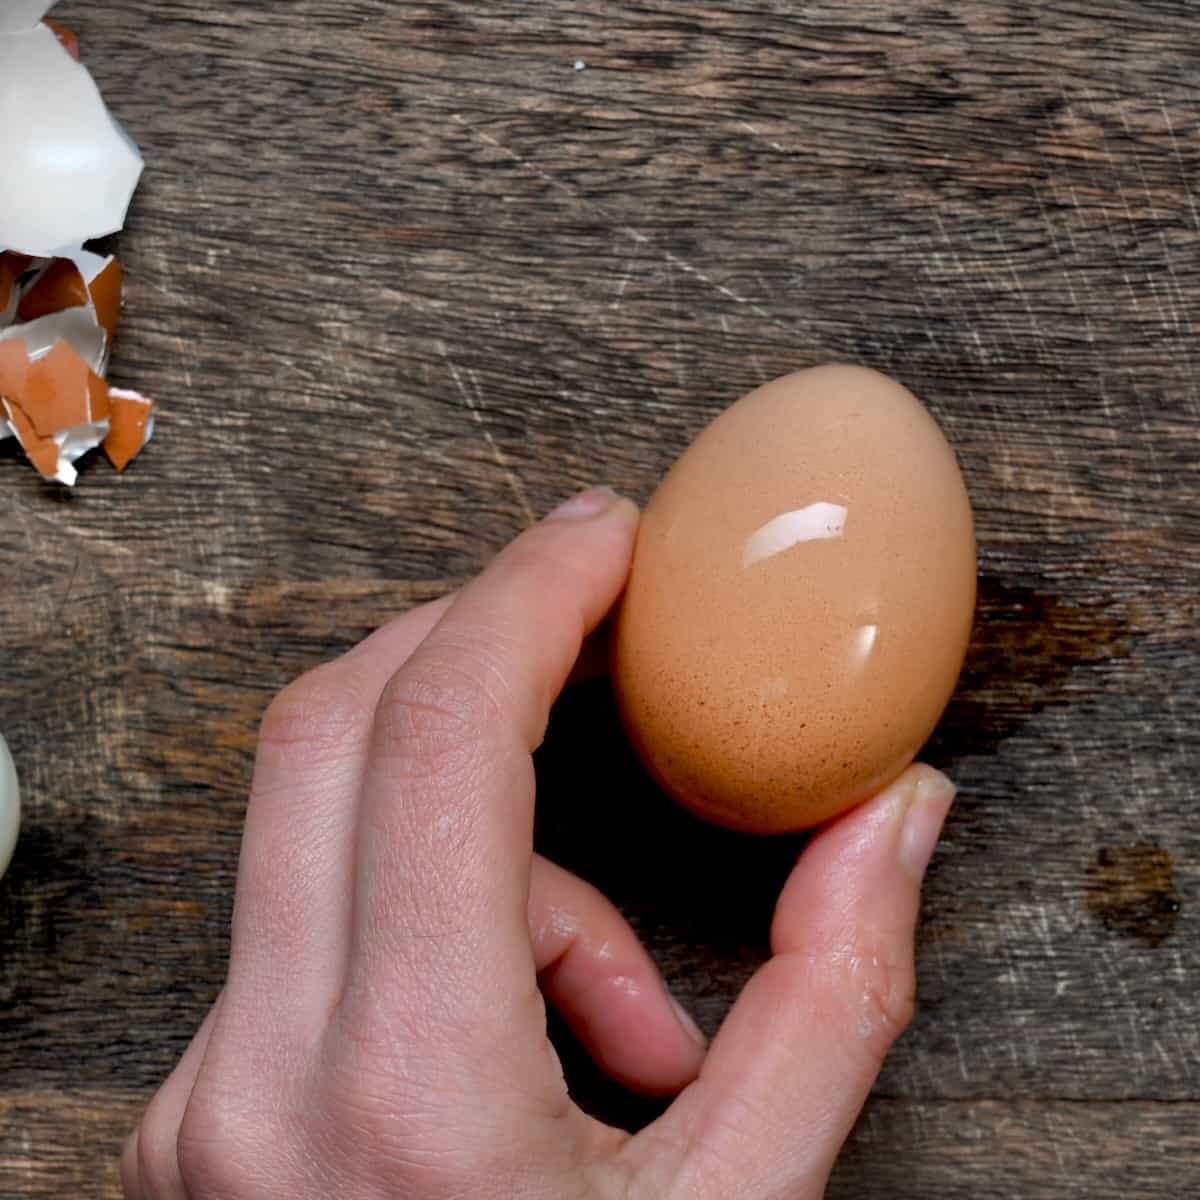 Tapping a boiled egg on a board to break the shell